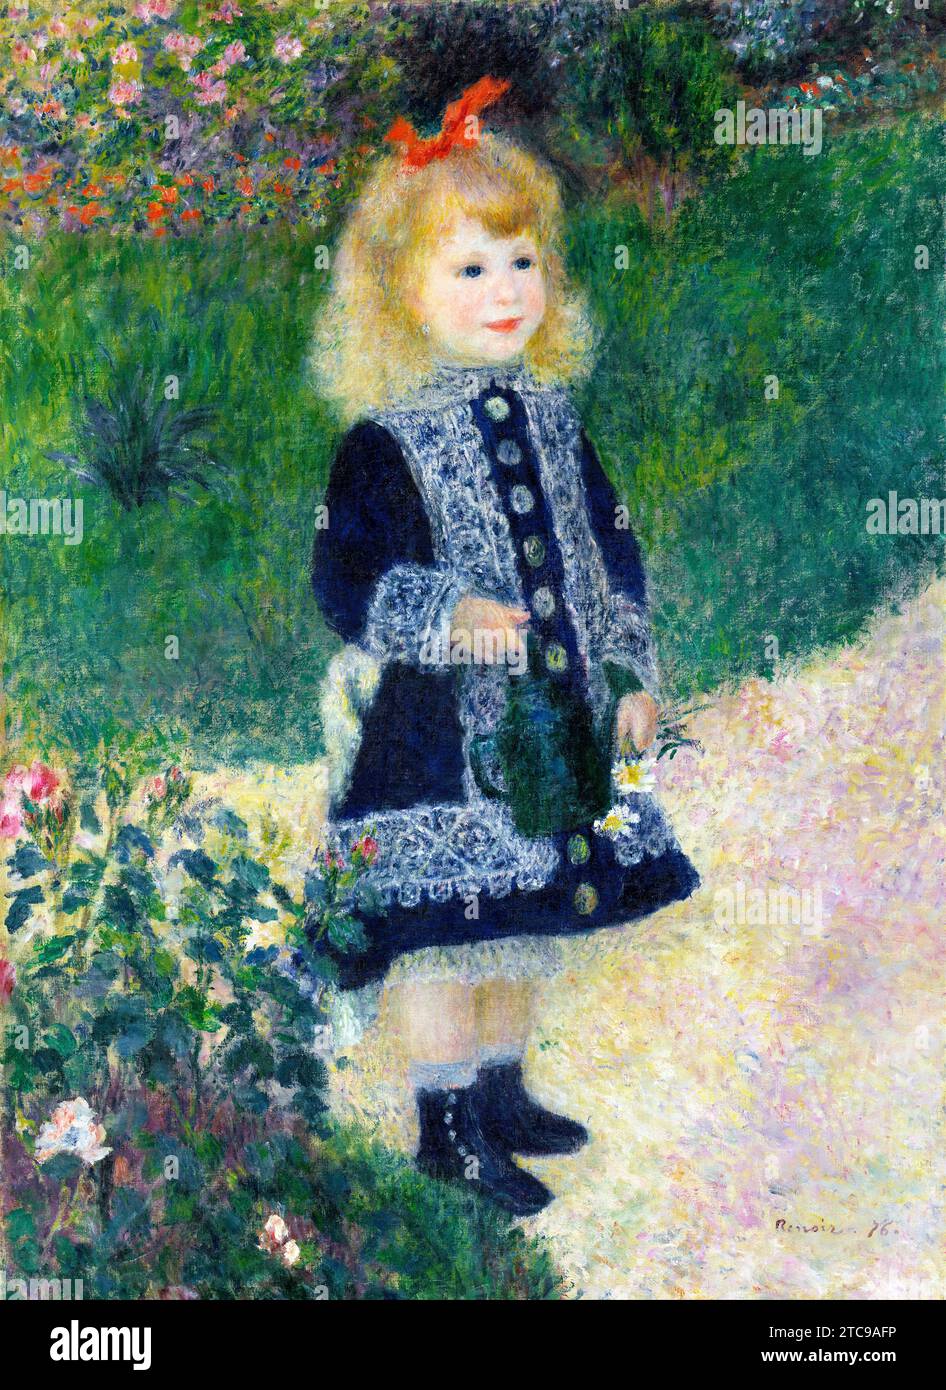 Auguste Renoir - A Girl with a Watering Can - Google Art Project Stock Photo